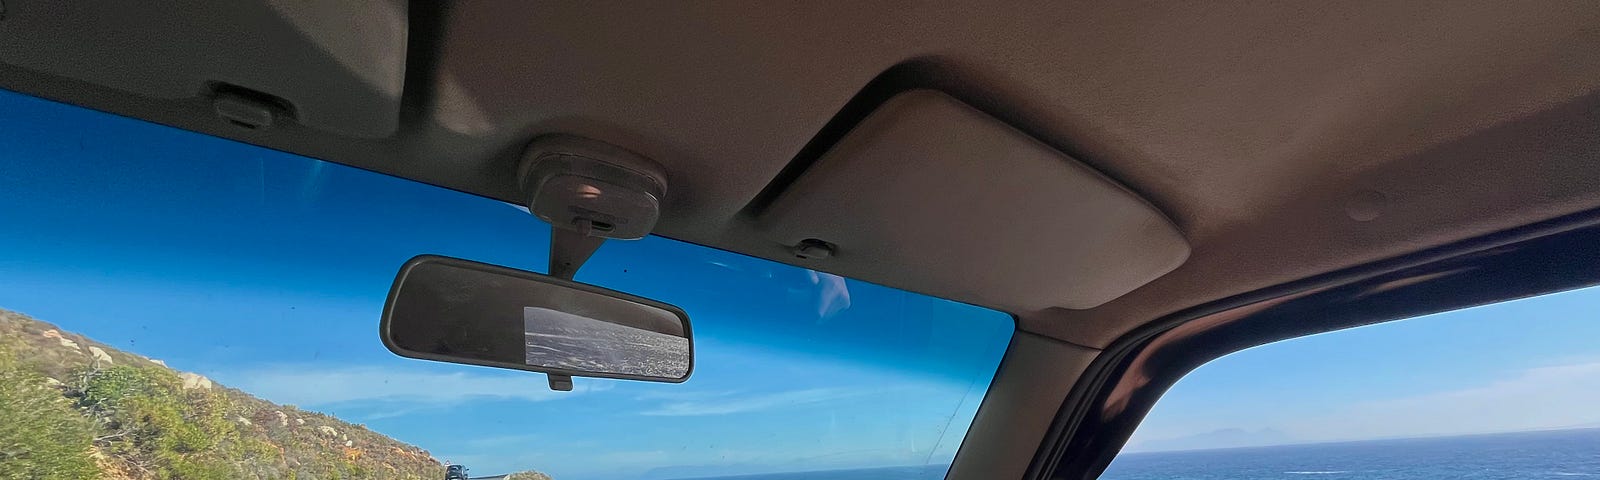 Image out of a car containing the road going forward and the ocean to the left. A hand is on the steering wheel.